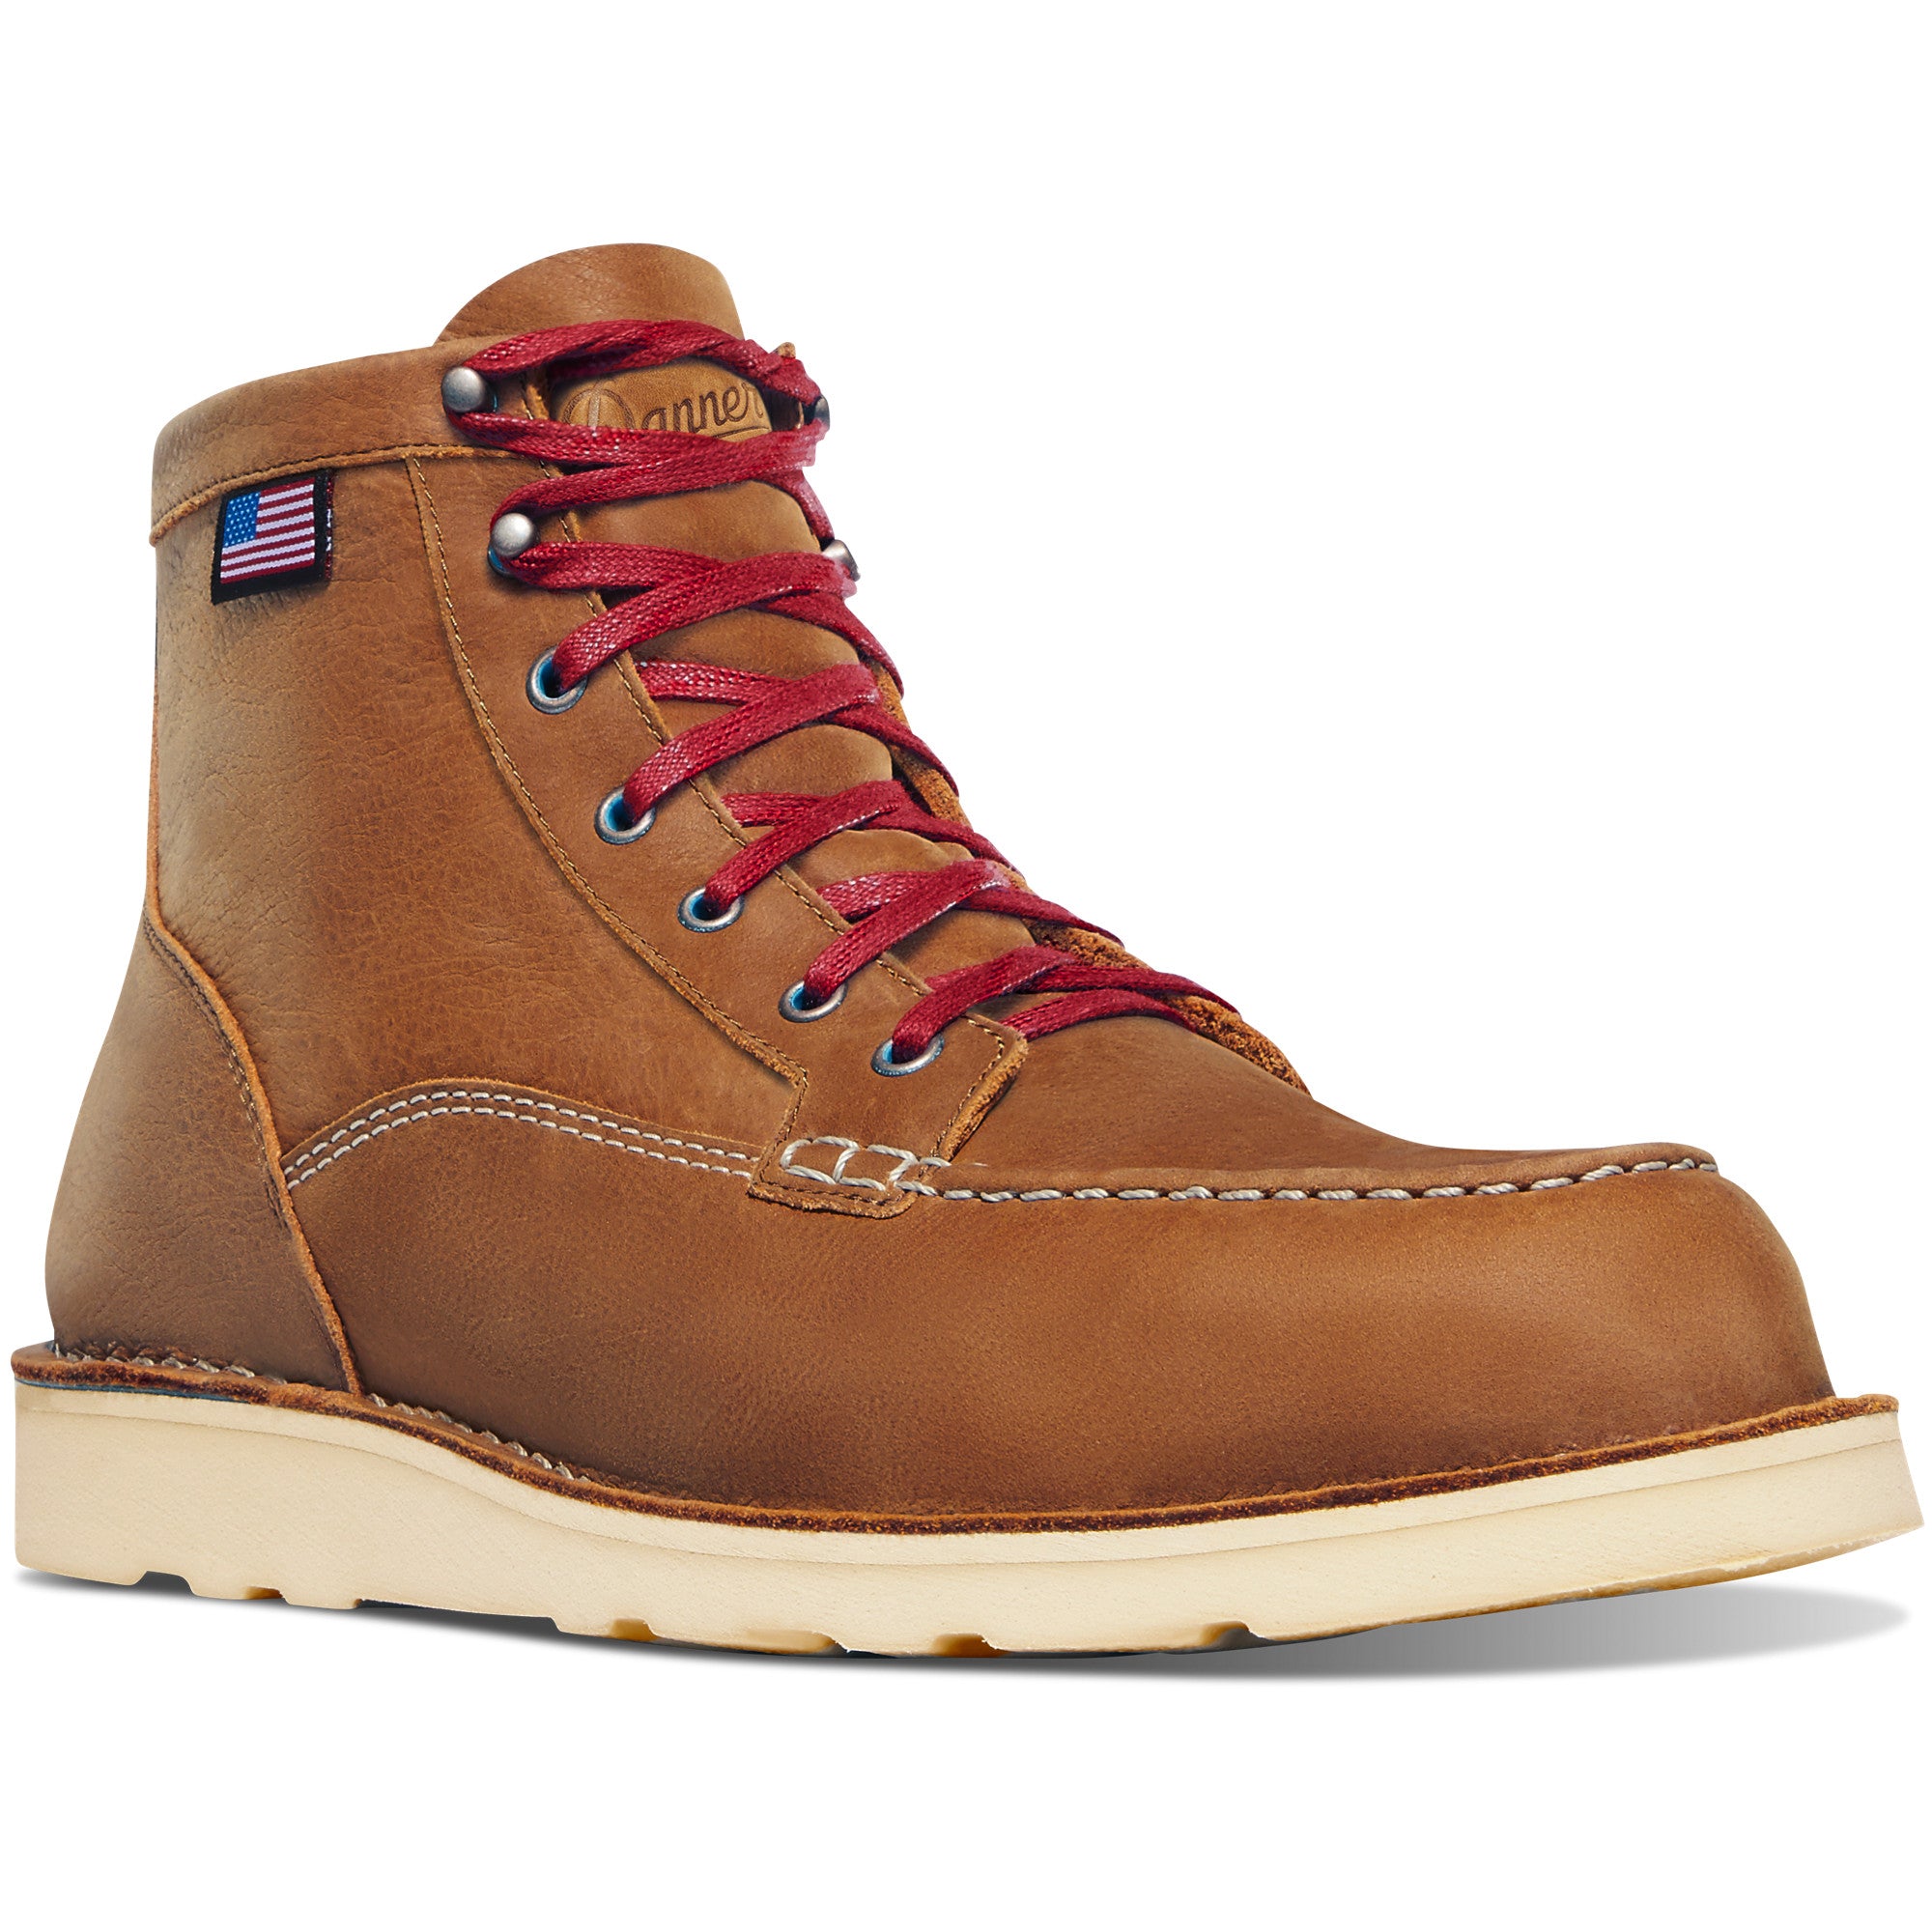 Men's Danner Bull Run Lux Lifestyle Boot  in Sunstone from the side view